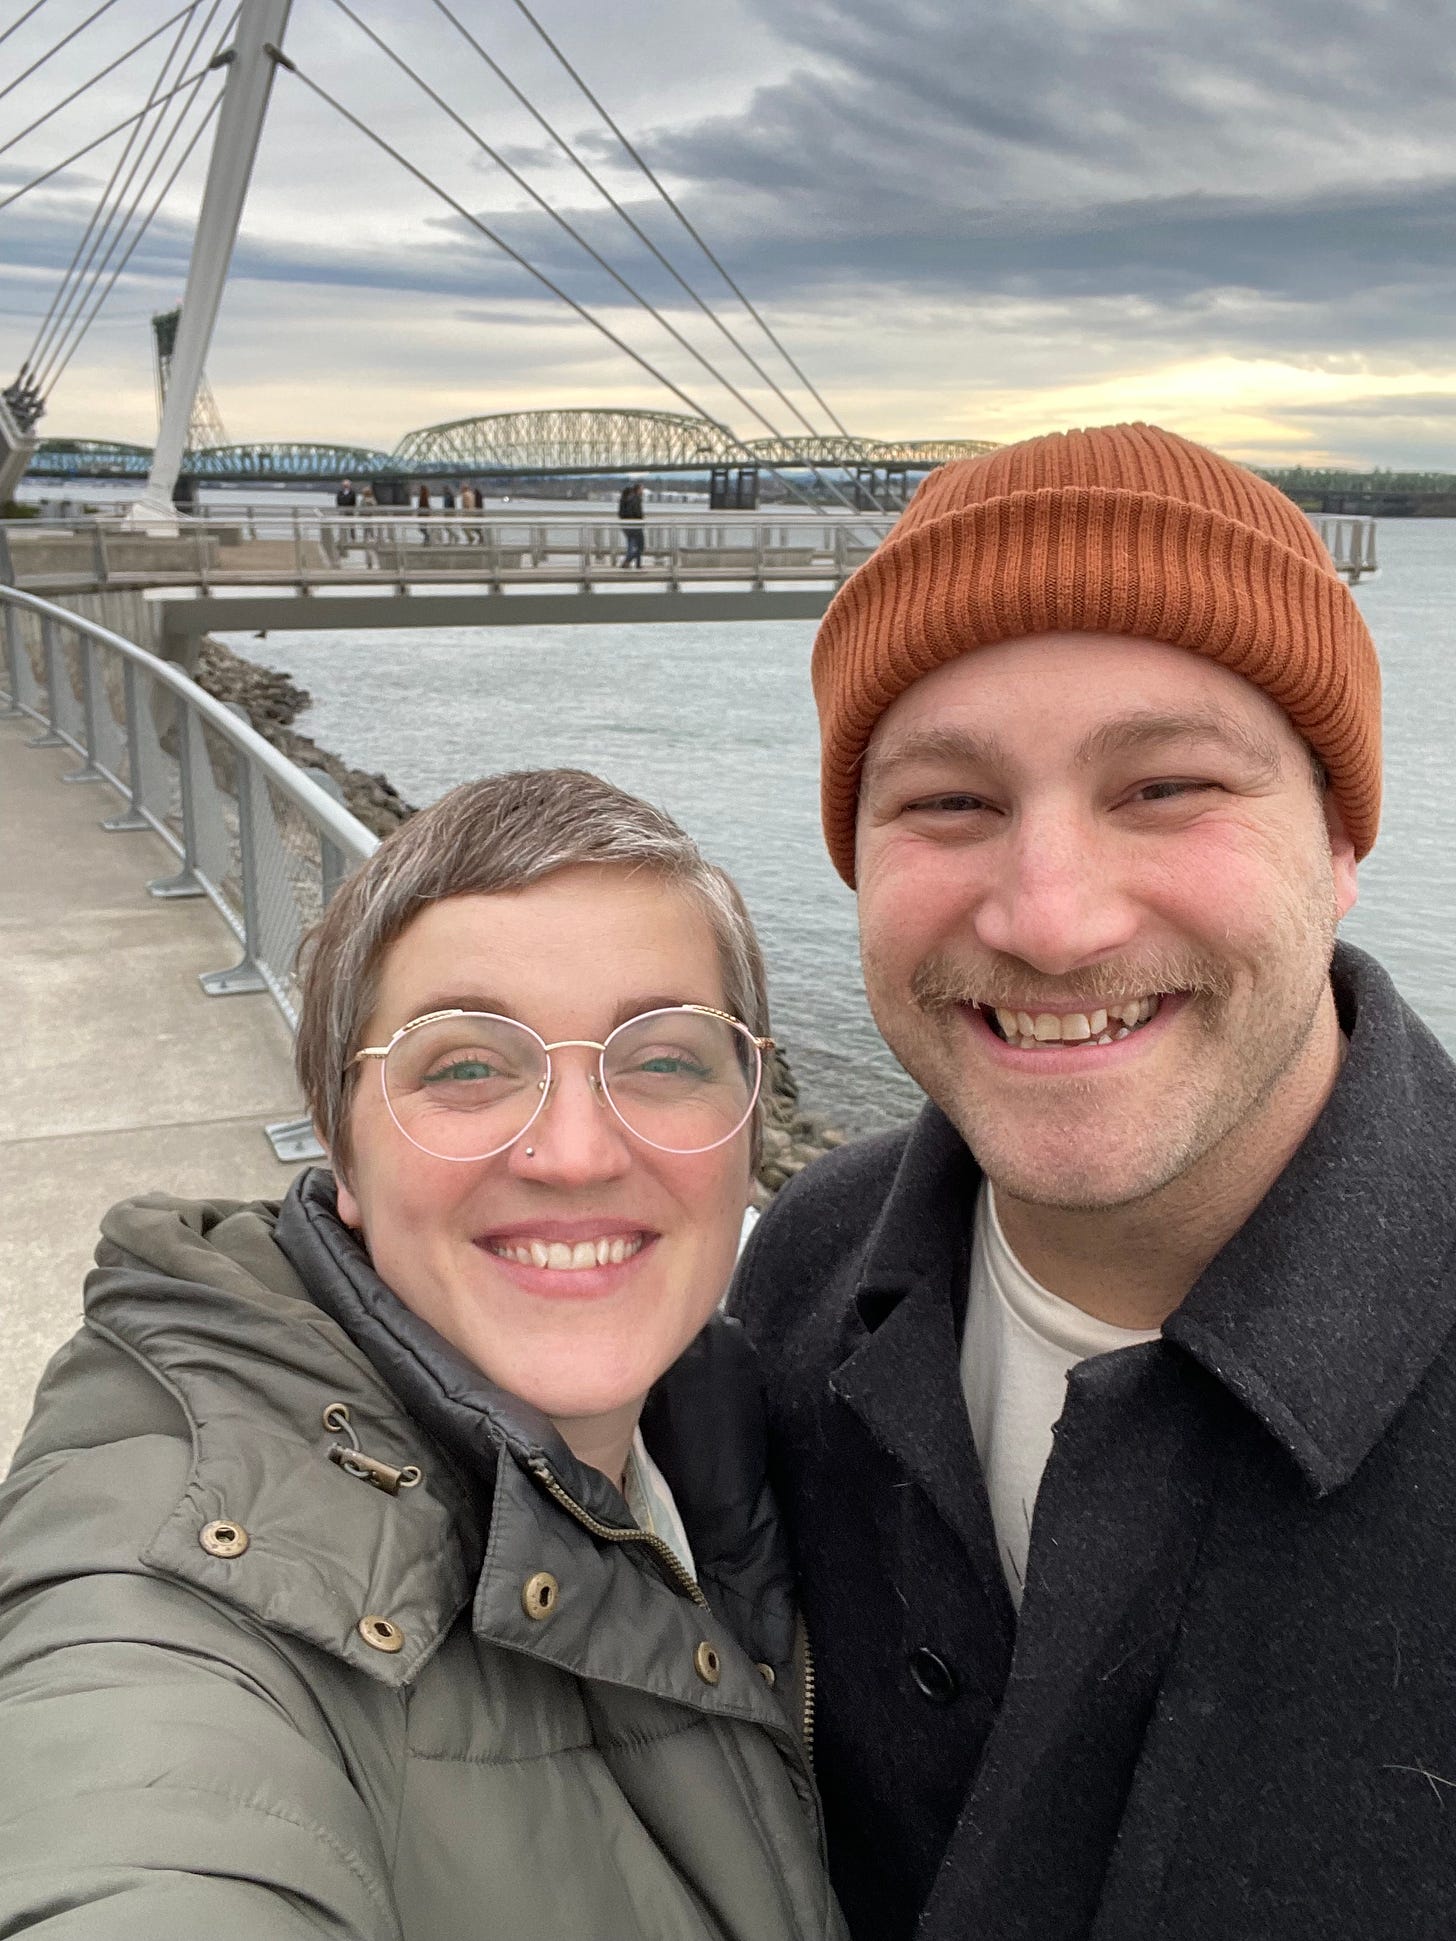 a white couple in their late 30s is standing in front of a river. The man has a mustache and is wearing a red beanie and is smiling. The other person has short graying hair and glasses and is also smiling. they look very happy together, because they are